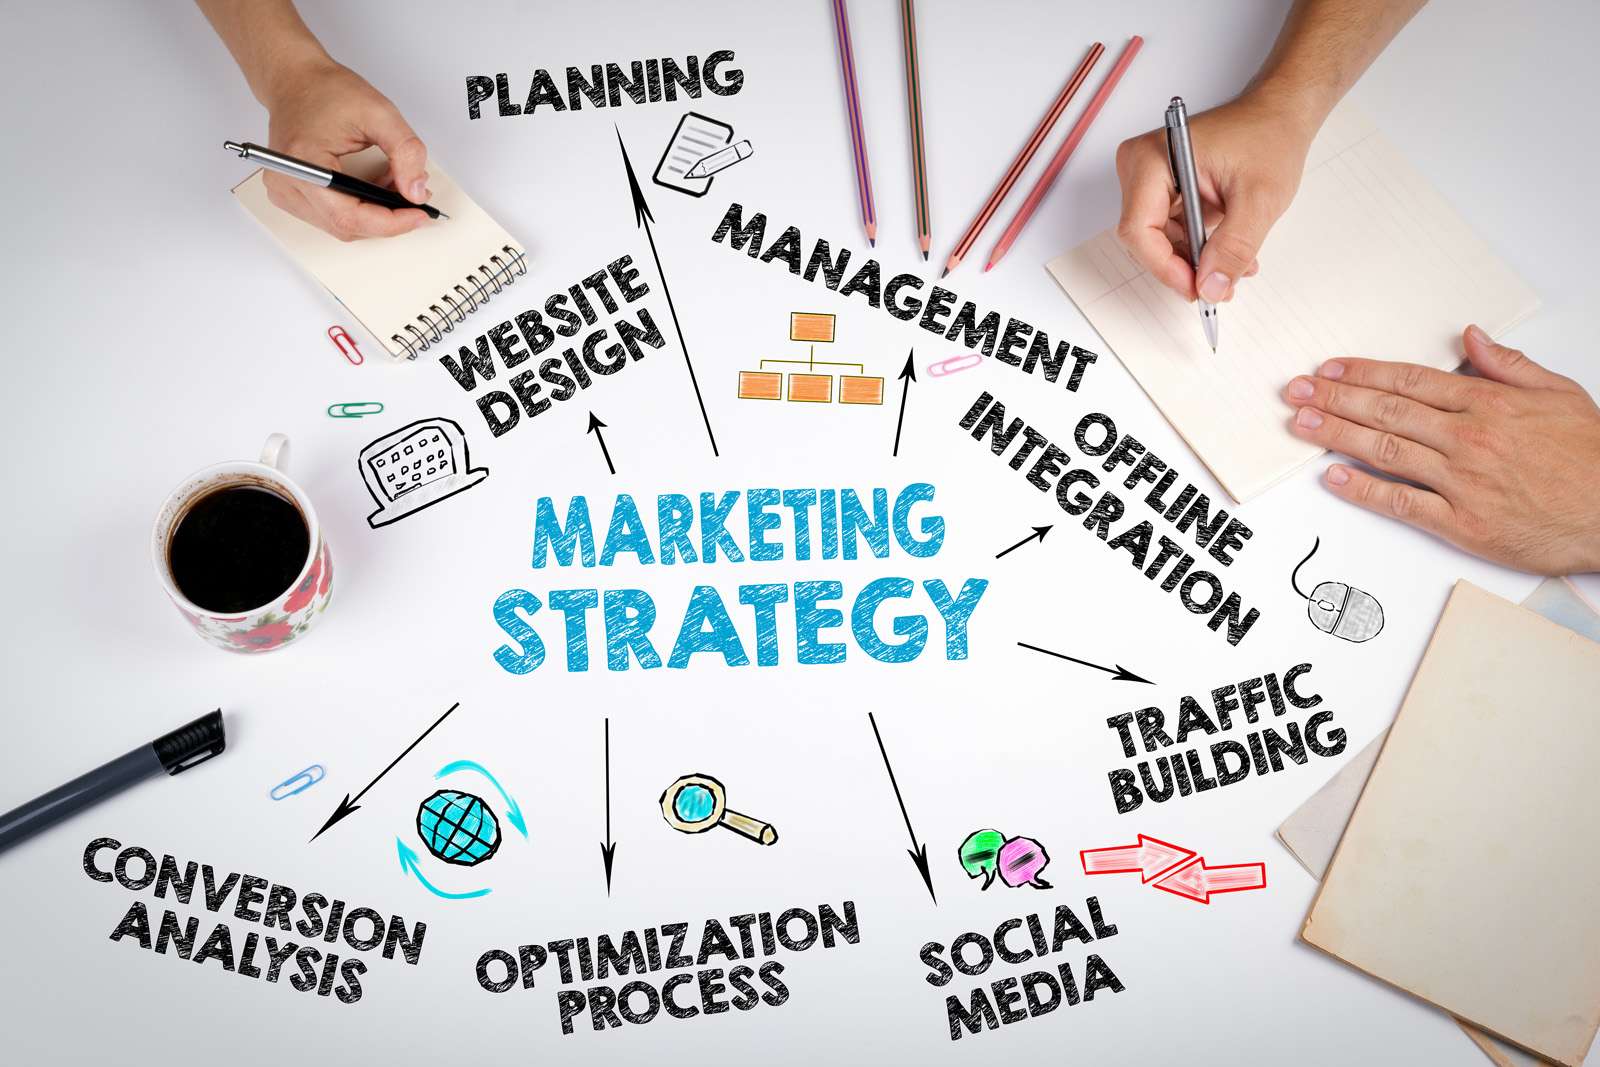 What Are The Three Key Pillars Of Marketing Strategy 